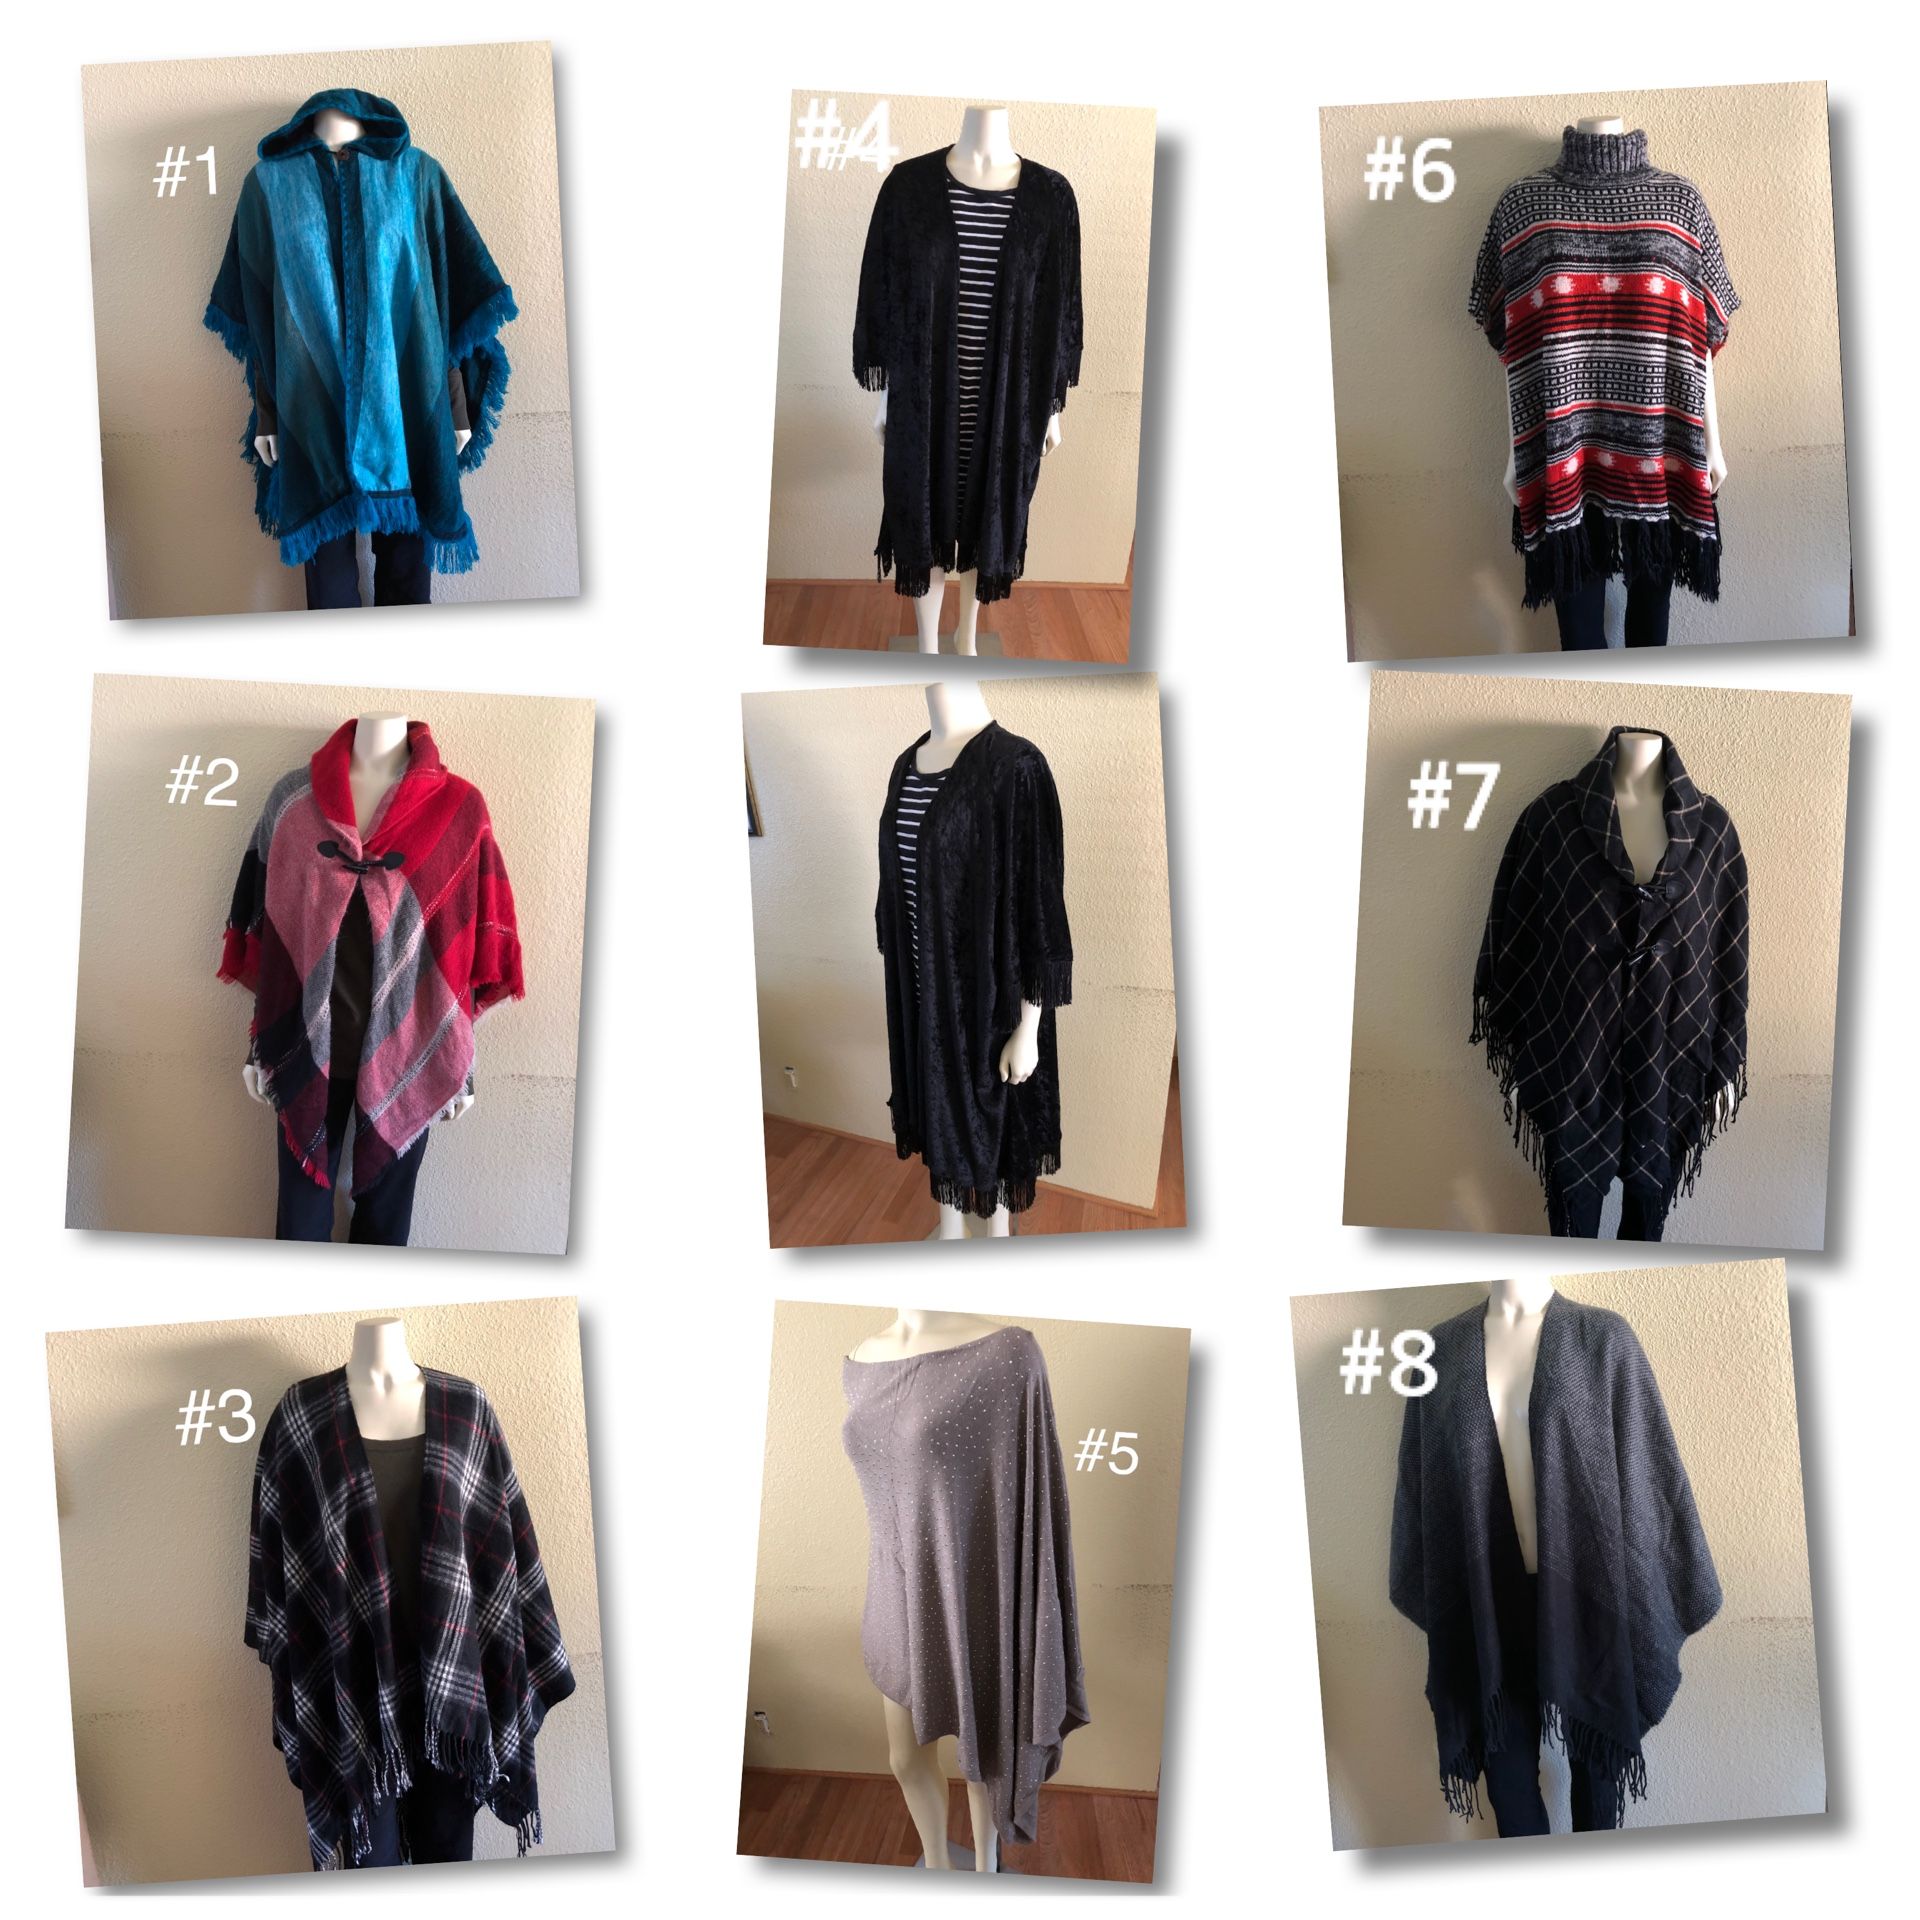 Women’s Ponchos (Prices Listed on Description)